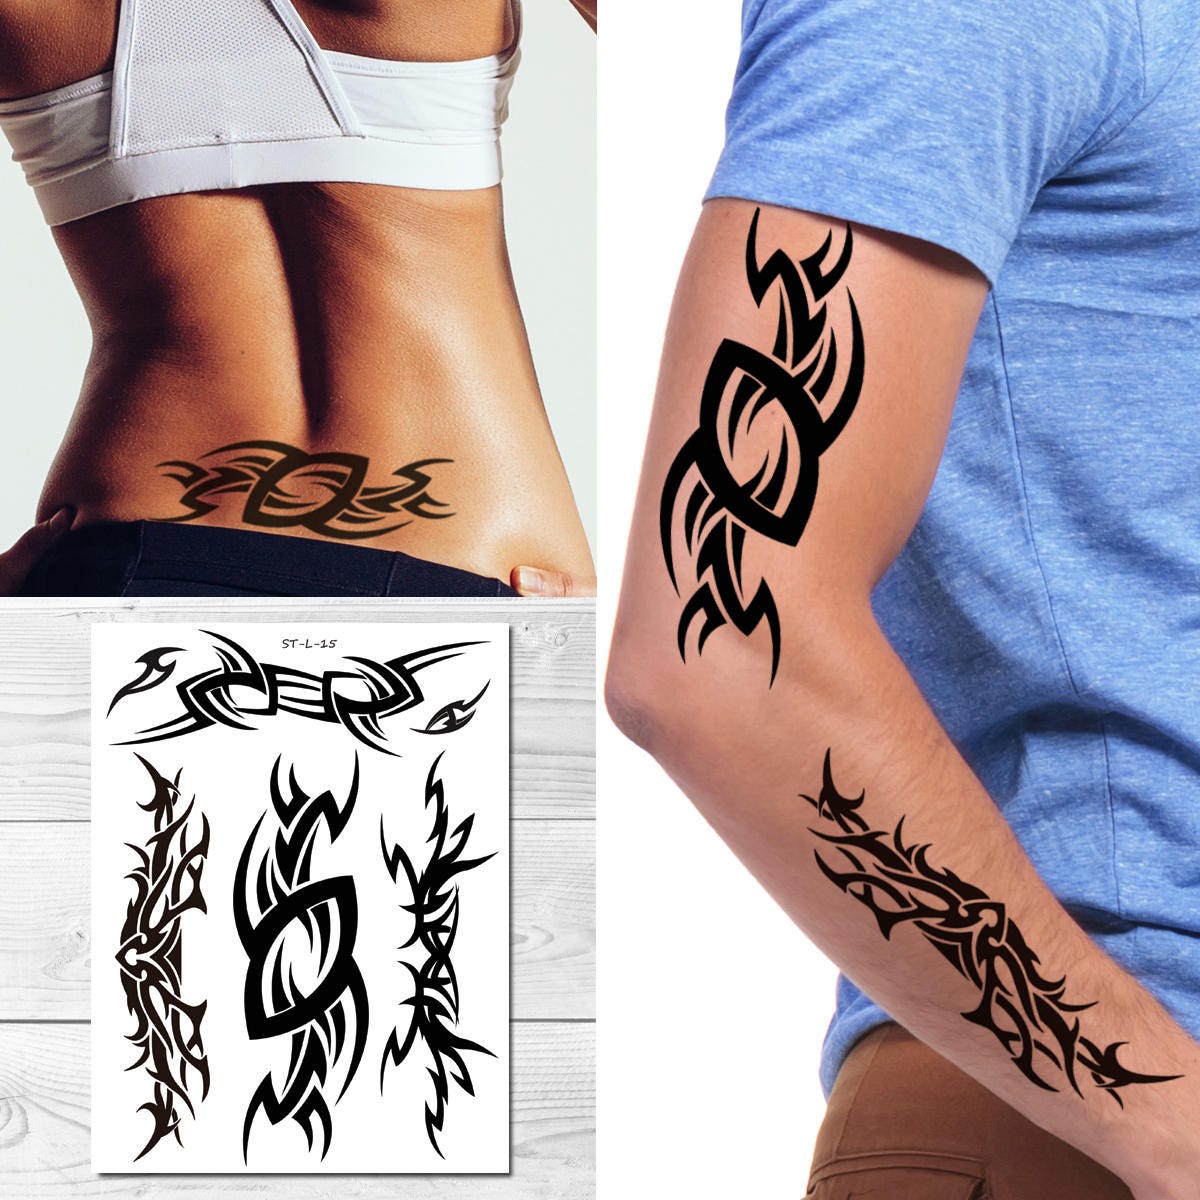 Buy Supperb Large Temporary Tattoos Tribal Art Tattoos Online in India   Etsy